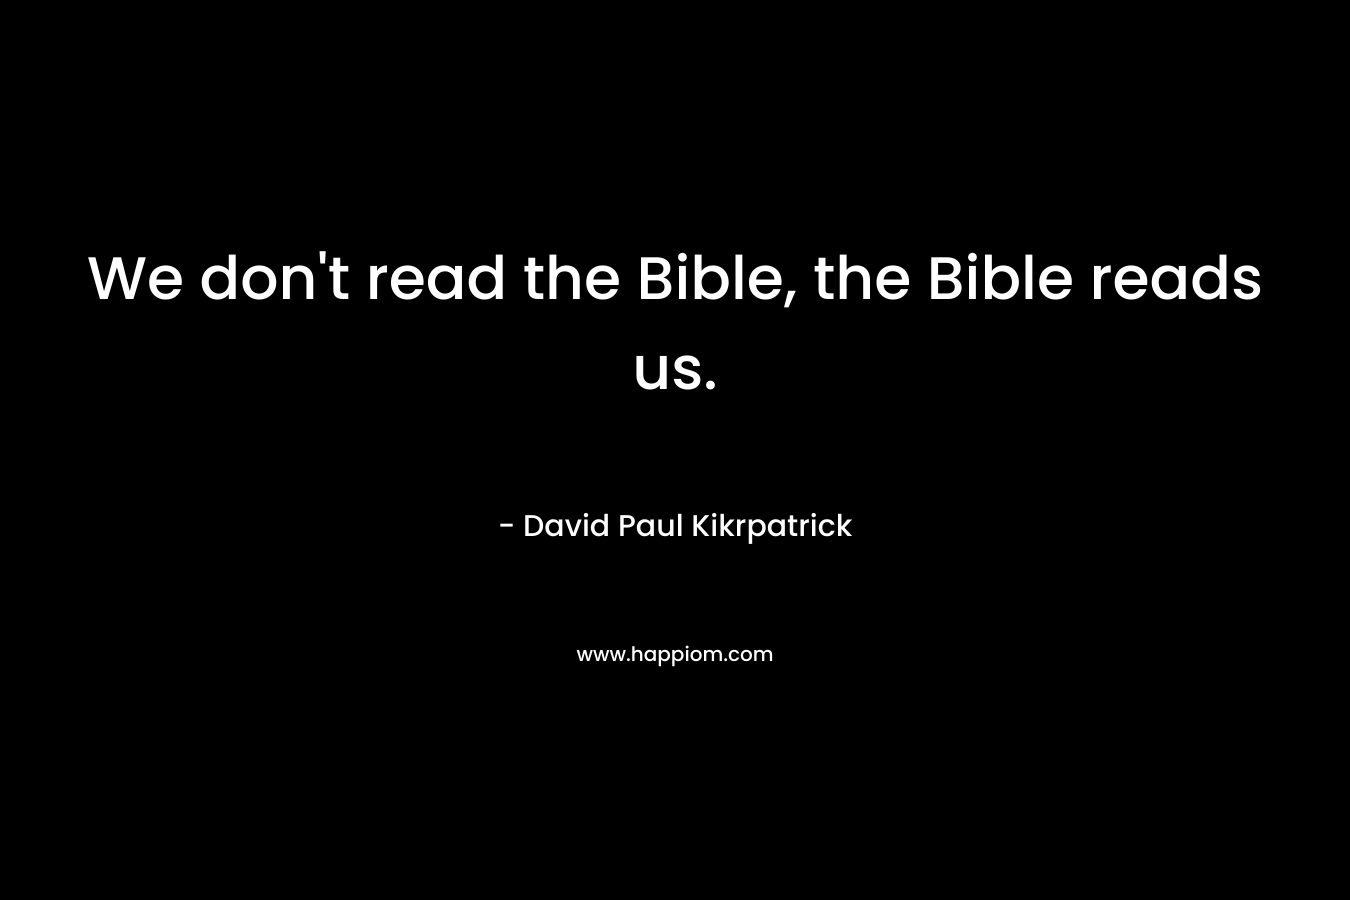 We don't read the Bible, the Bible reads us.